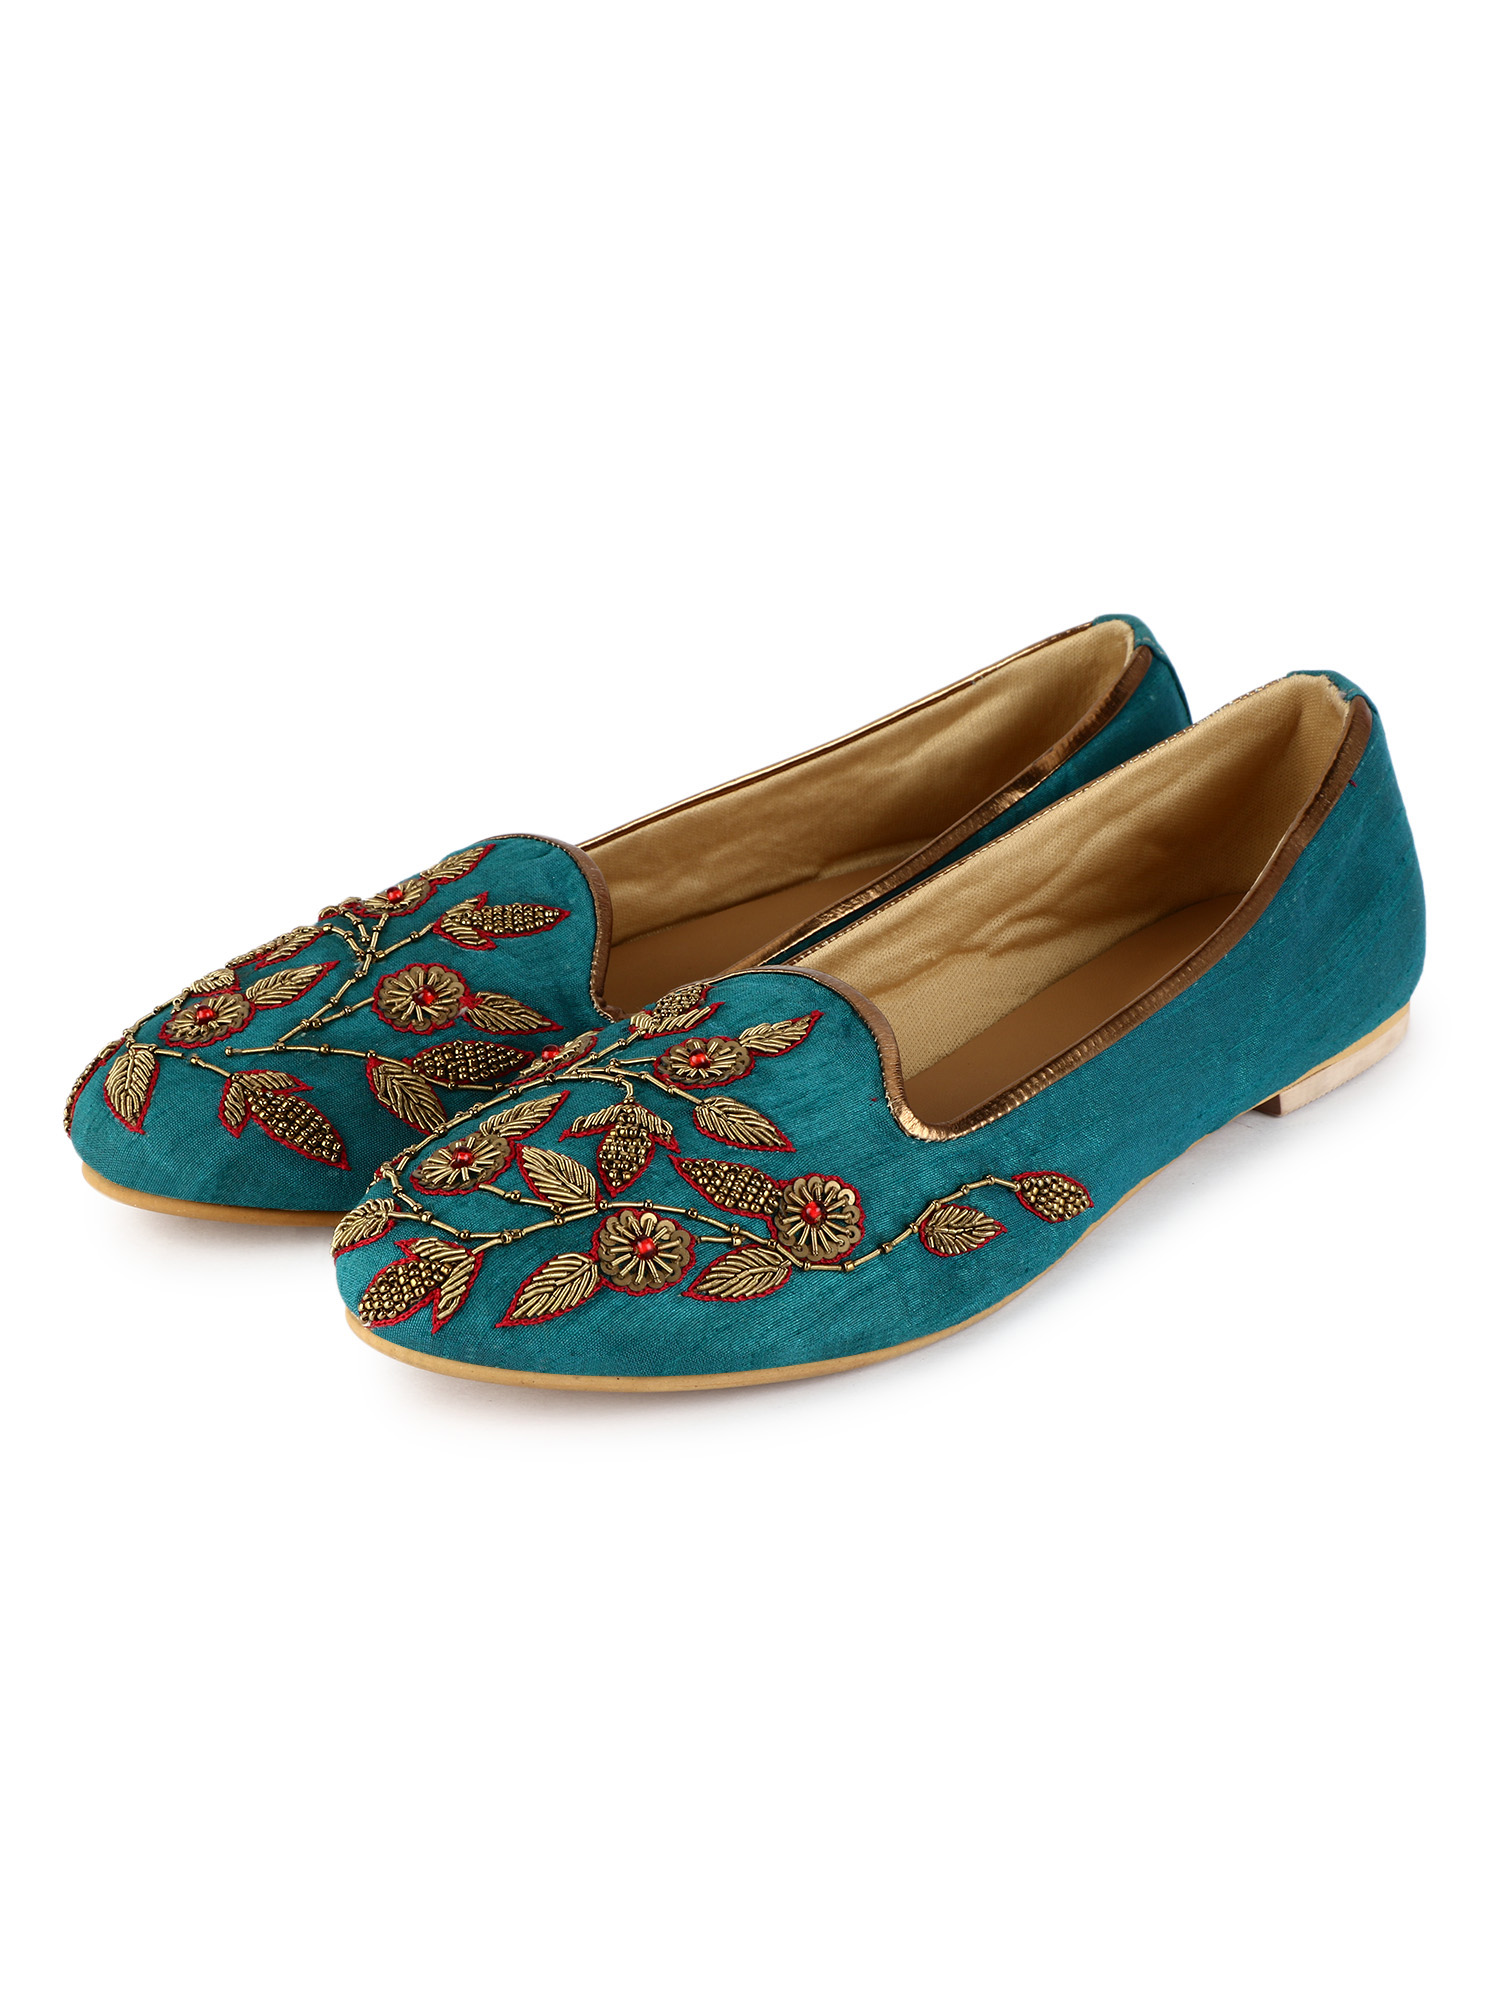 Beaded floral teal loafers 